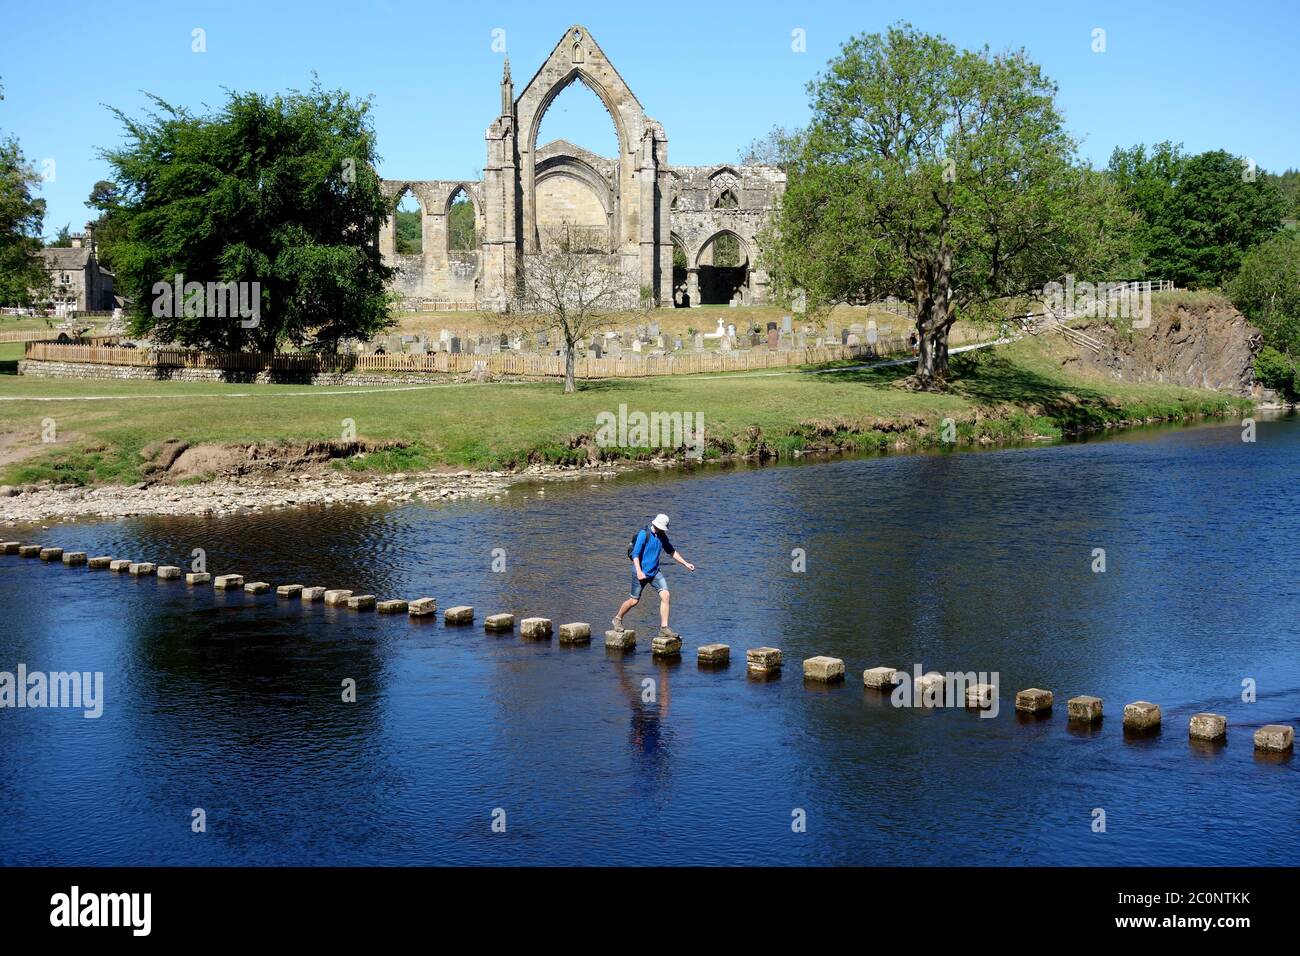 Single Man Walking on Stepping Stones over the River Wharfe by the Ruins of Bolton Priory, Wharfedale, Yorkshire Dales National Park, England UK. Stock Photo